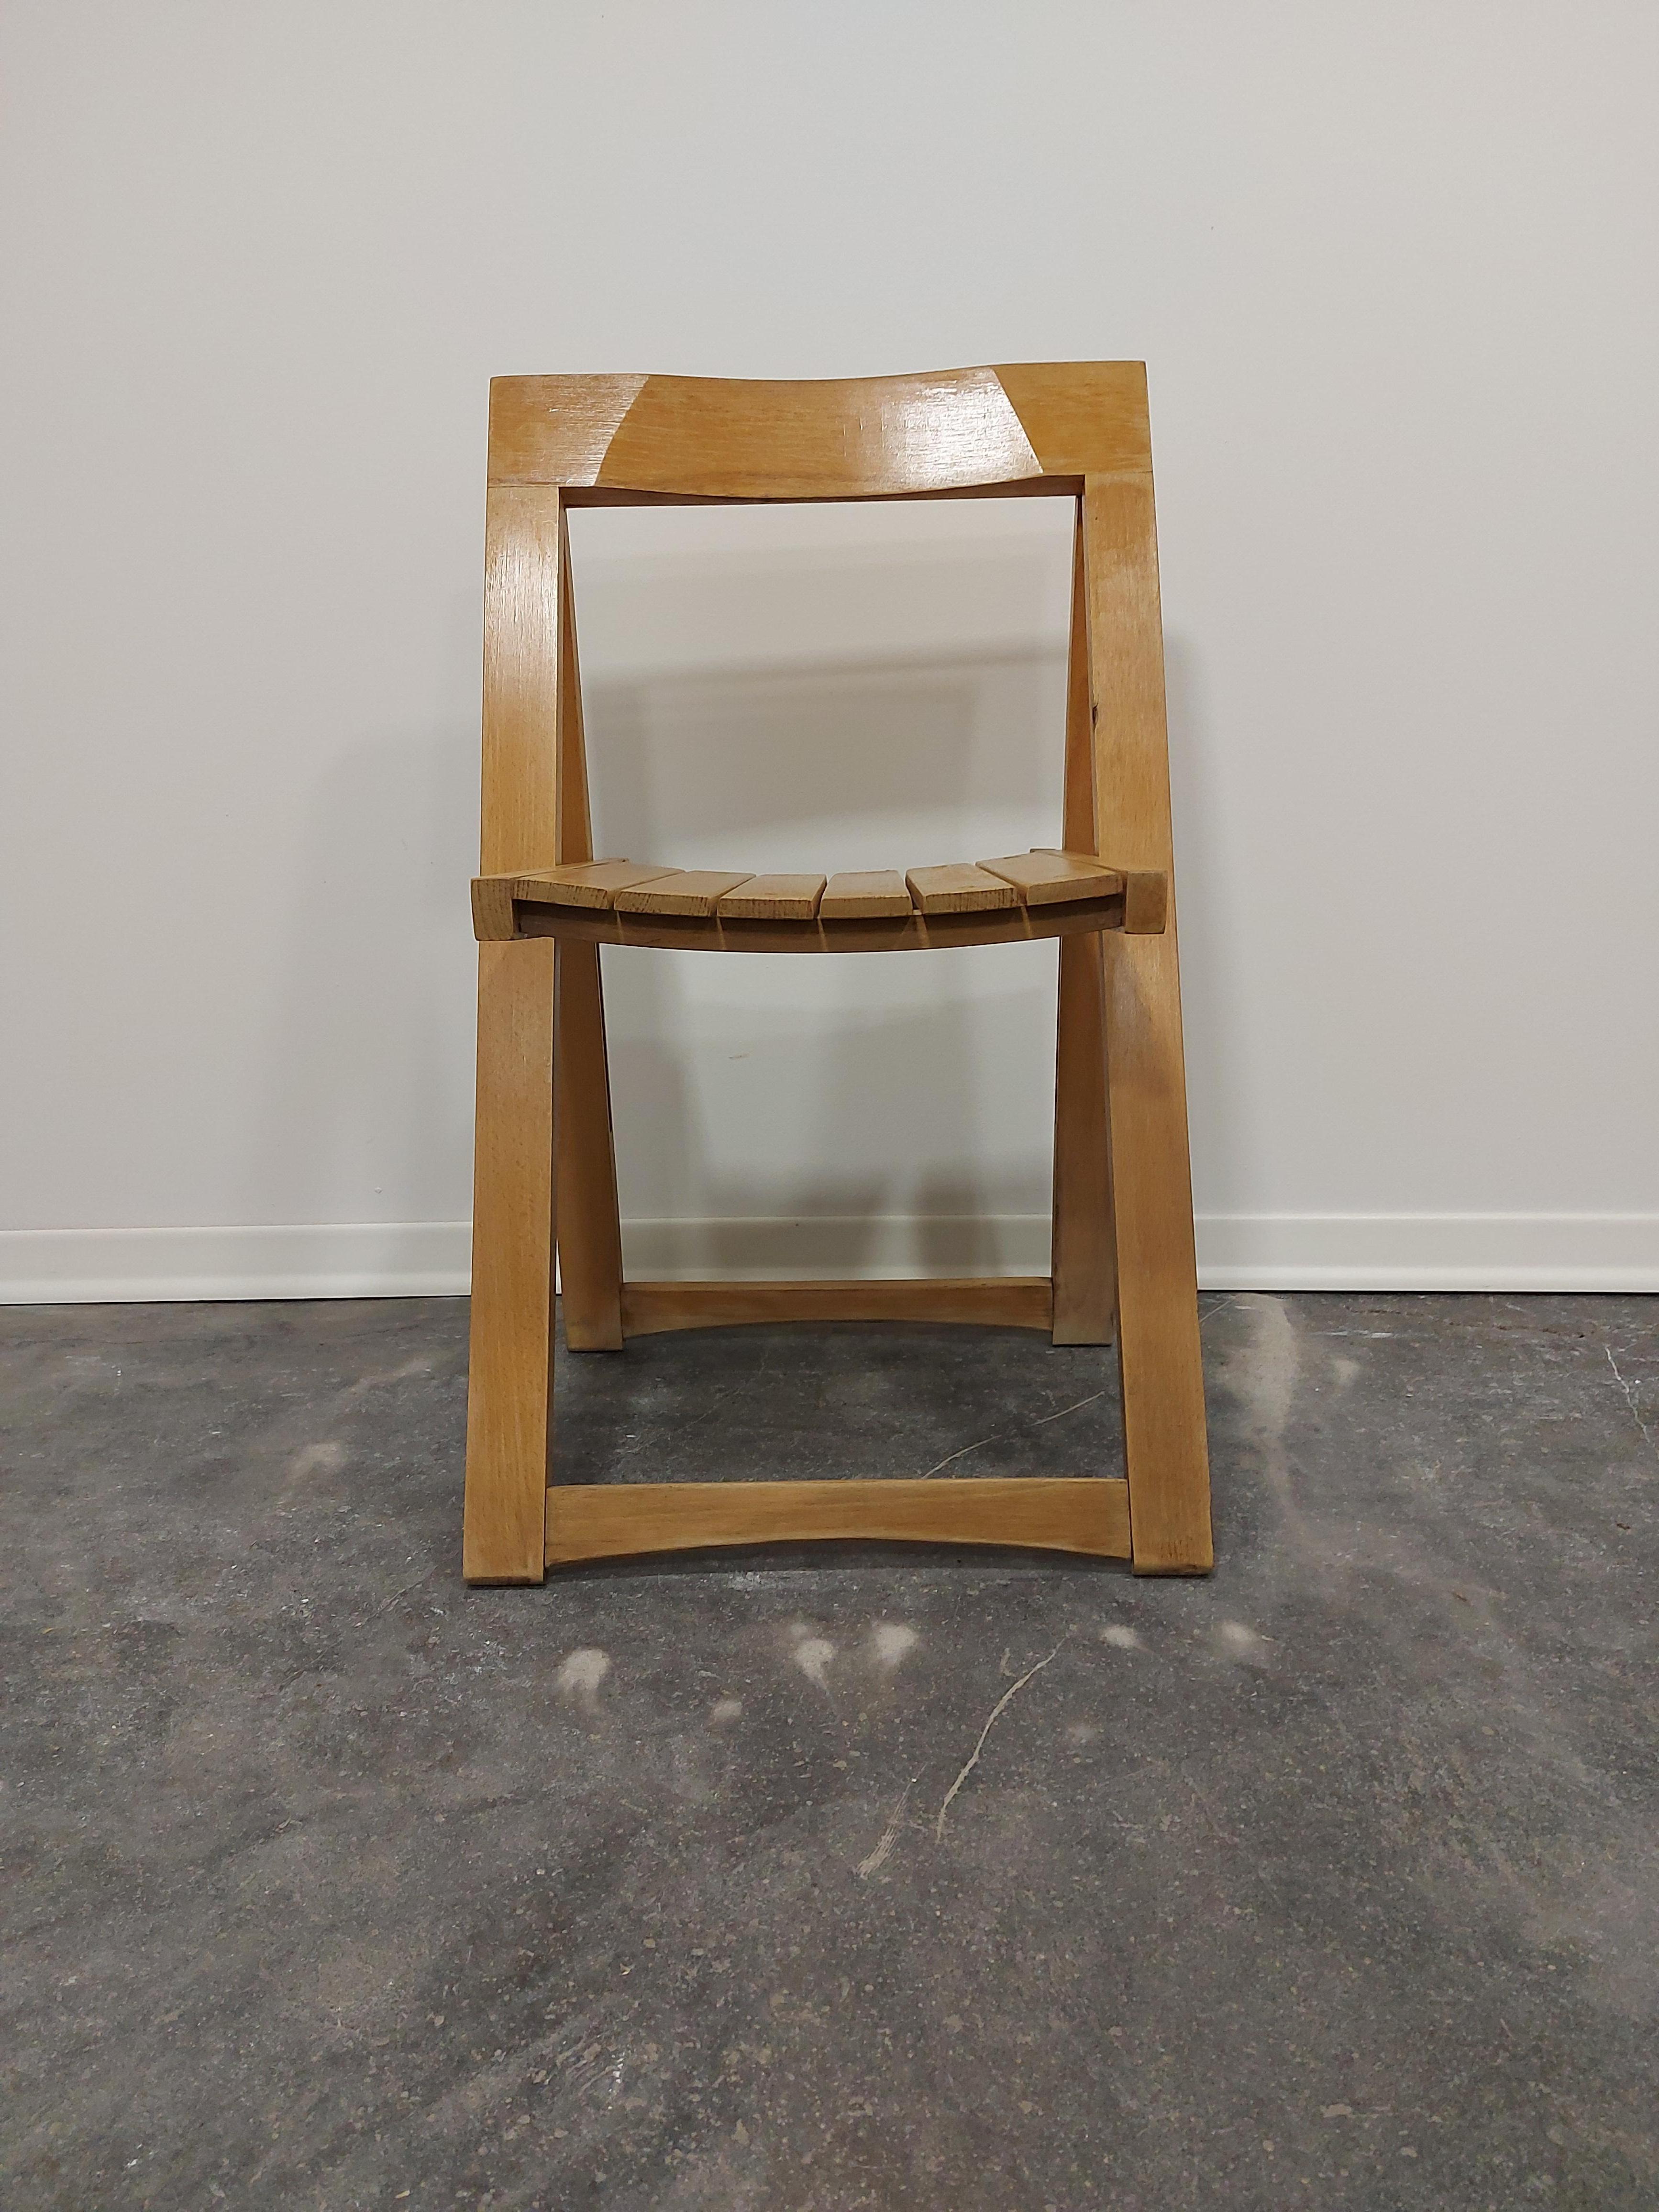 Late 20th Century Folding Chair by Aldo Jacober, 1970s 1 of 4 For Sale